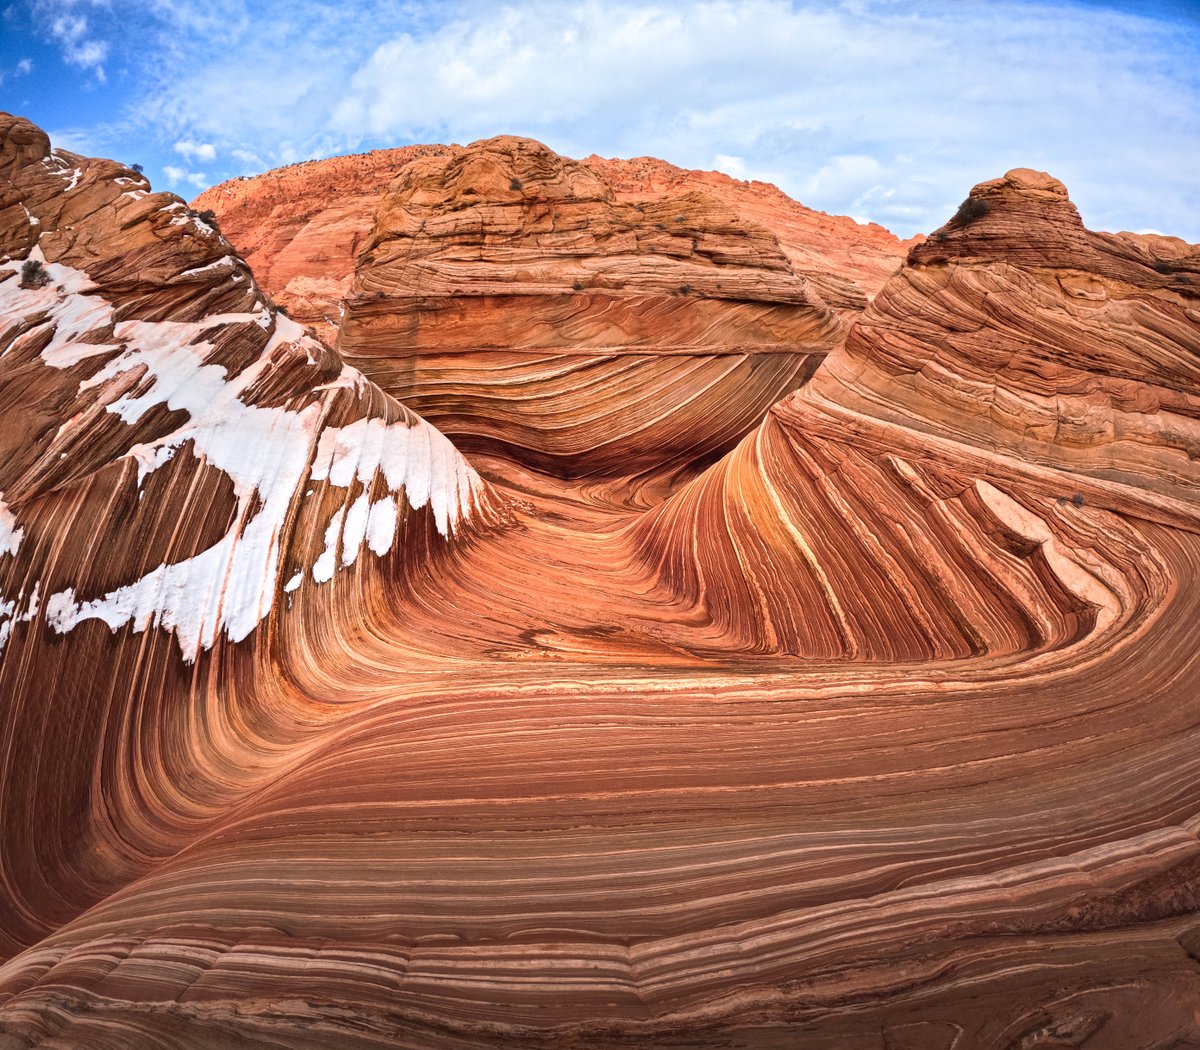 Photo of the Day: Final signs of winter at 'The Wave' in northern Arizona 🏜️ Captured by GoPro Subscriber Joe Dginto for a $500 GoPro Award. #GoPro #LandscapePhotography #TheWave #Arizona #Travel #TravelPhotography